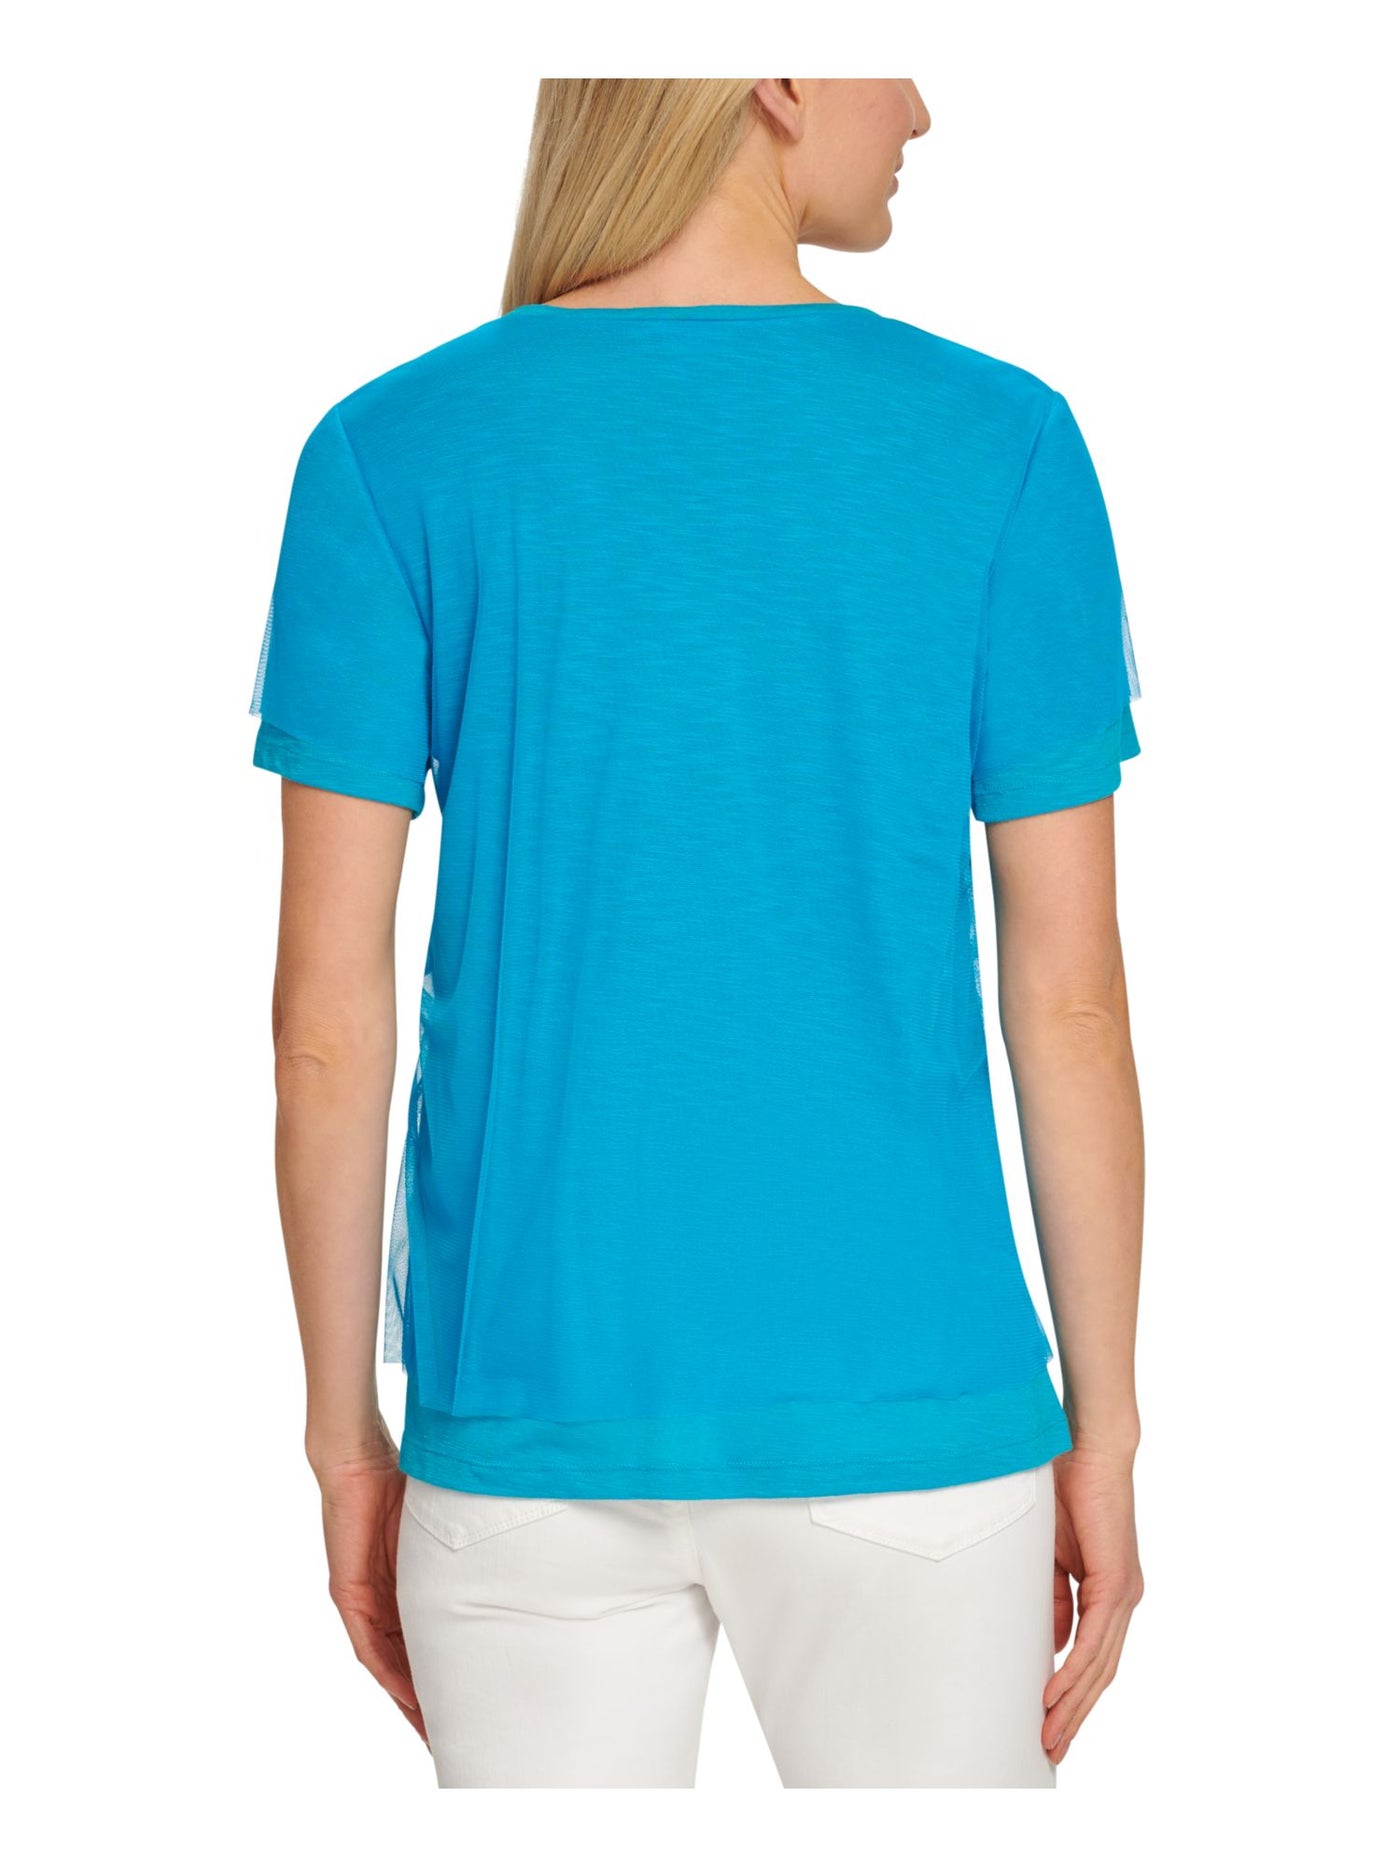 DKNY Womens Turquoise Textured Sheer Mesh Overlay Short Sleeve Scoop Neck Top M